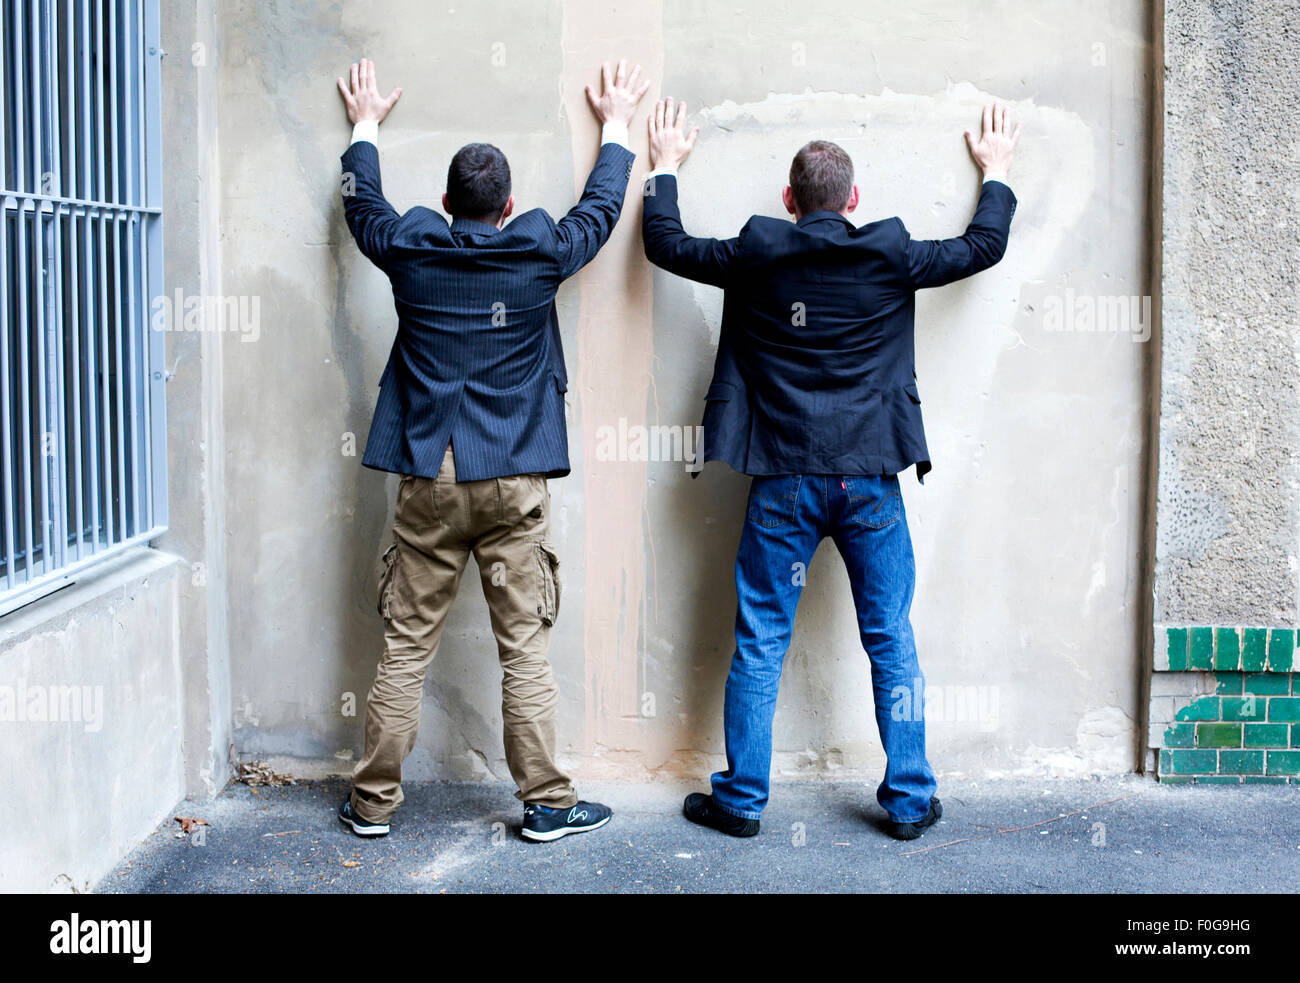 two men in jackets standing against a wall Stock Photo